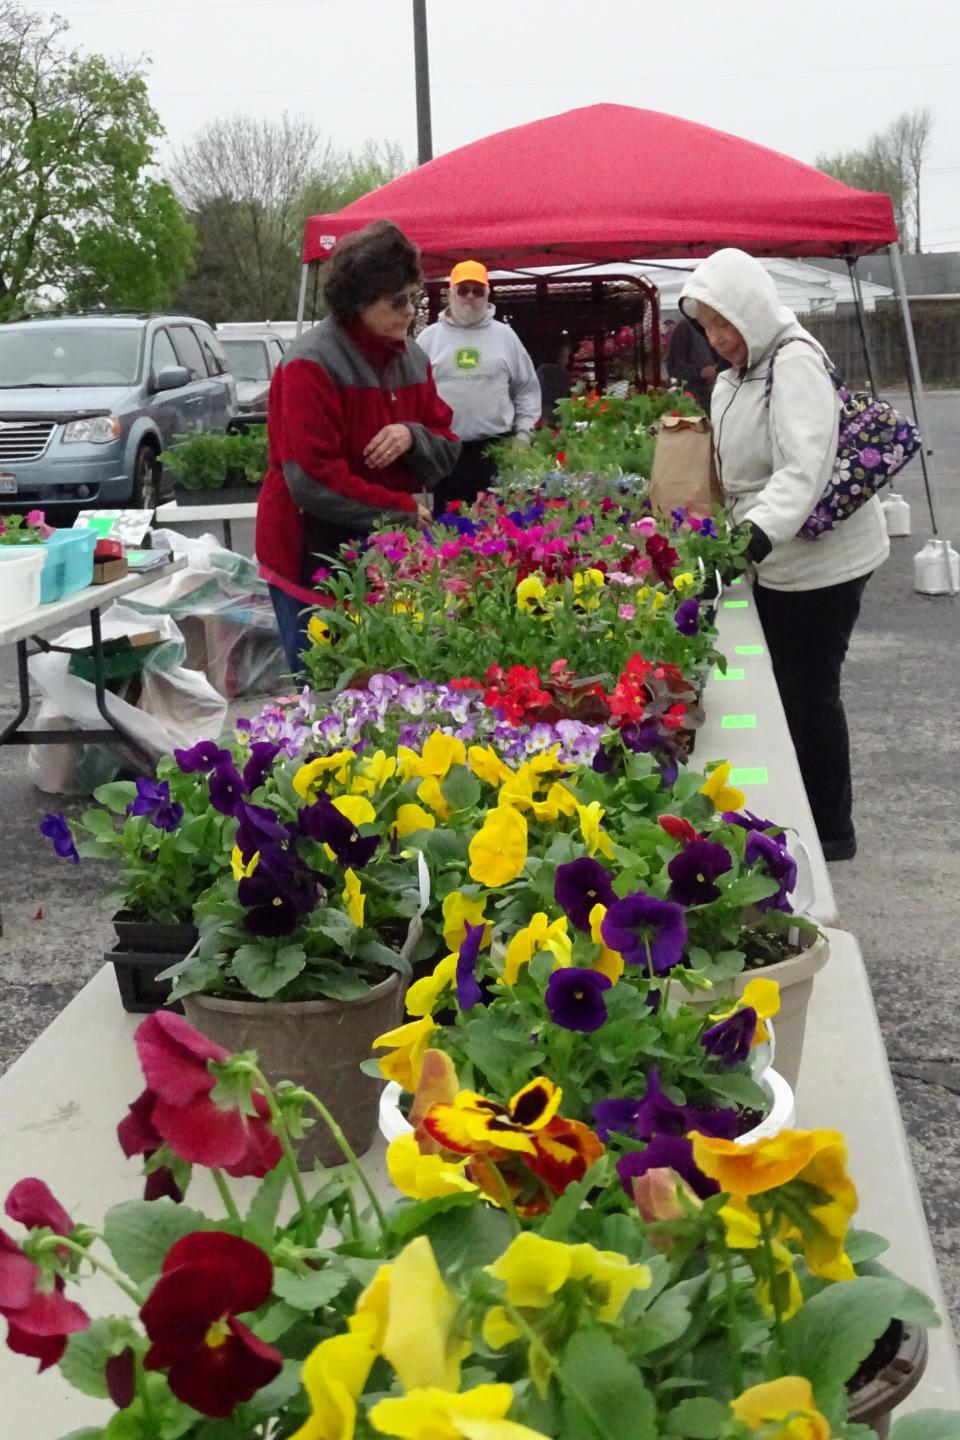 Becky and John Witter, left, help Joyce Hahn select plants at a Bucyrus Farmer's Market in 2019. The market takes place rain or shine from 8:30 a.m.-noon Saturdays through Oct. 26. (TELEGRAPH-FORUM FILE PHOTO)